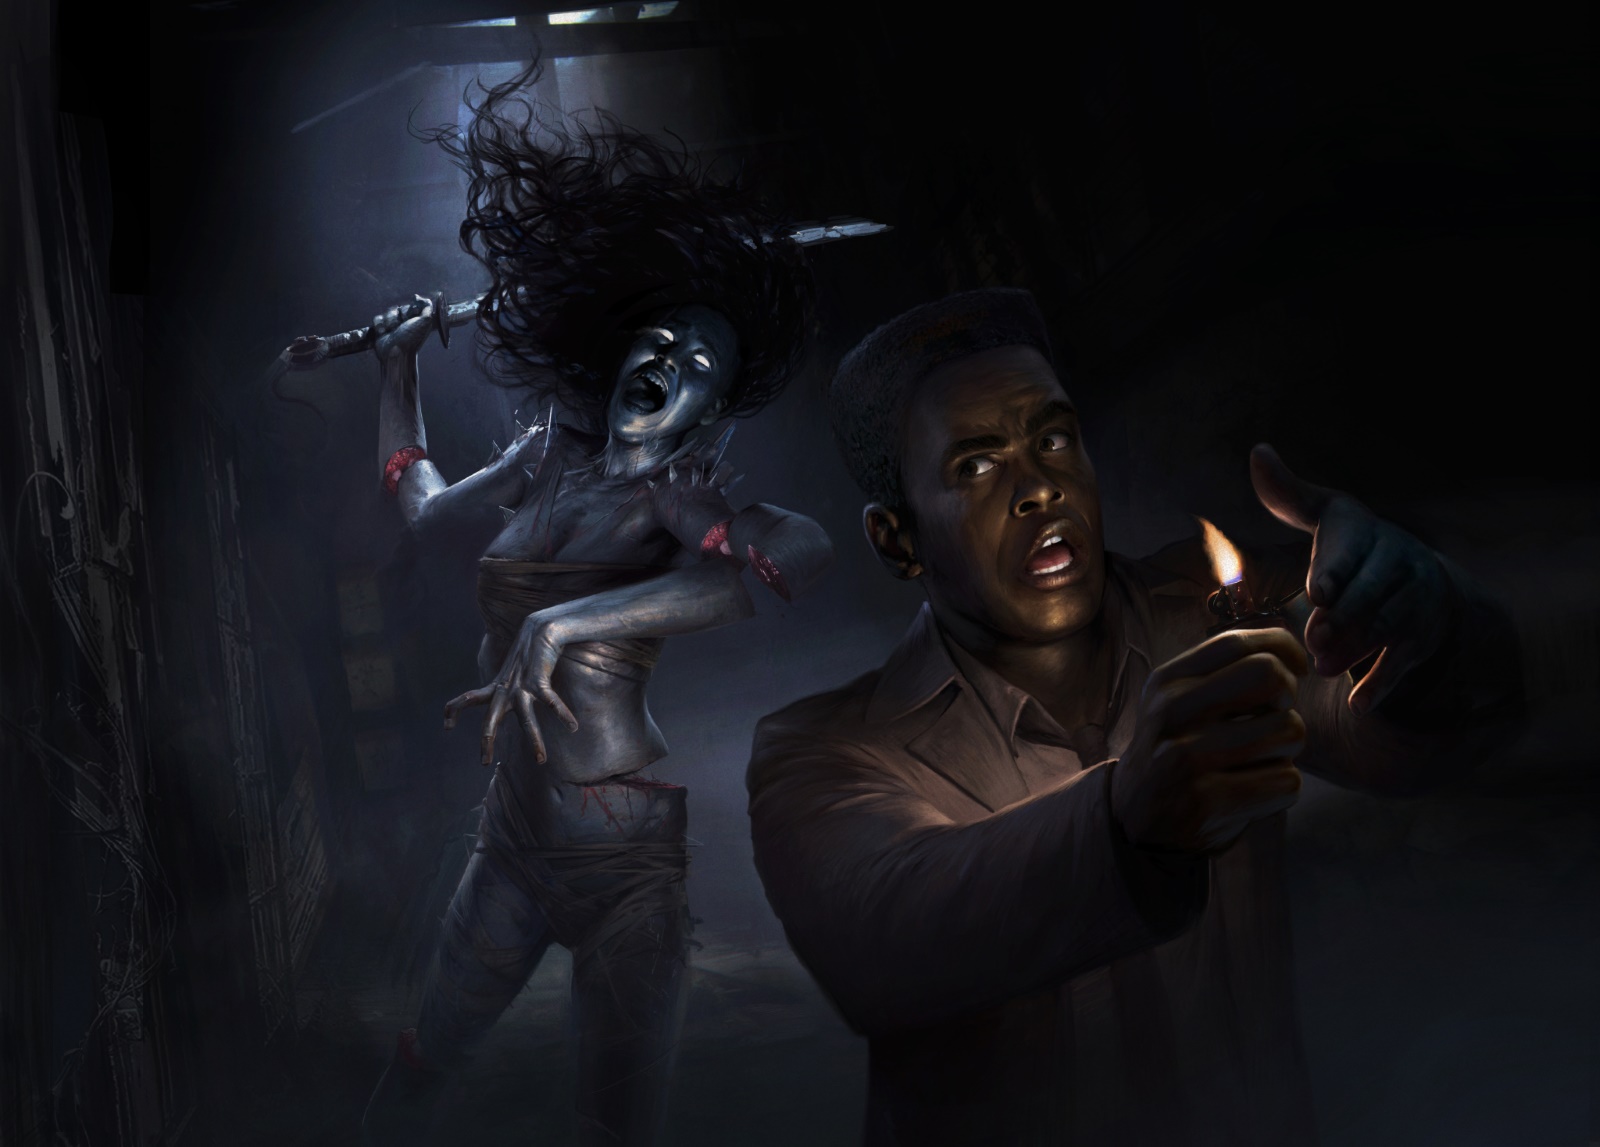 Dead by Daylight Shattered Bloodline